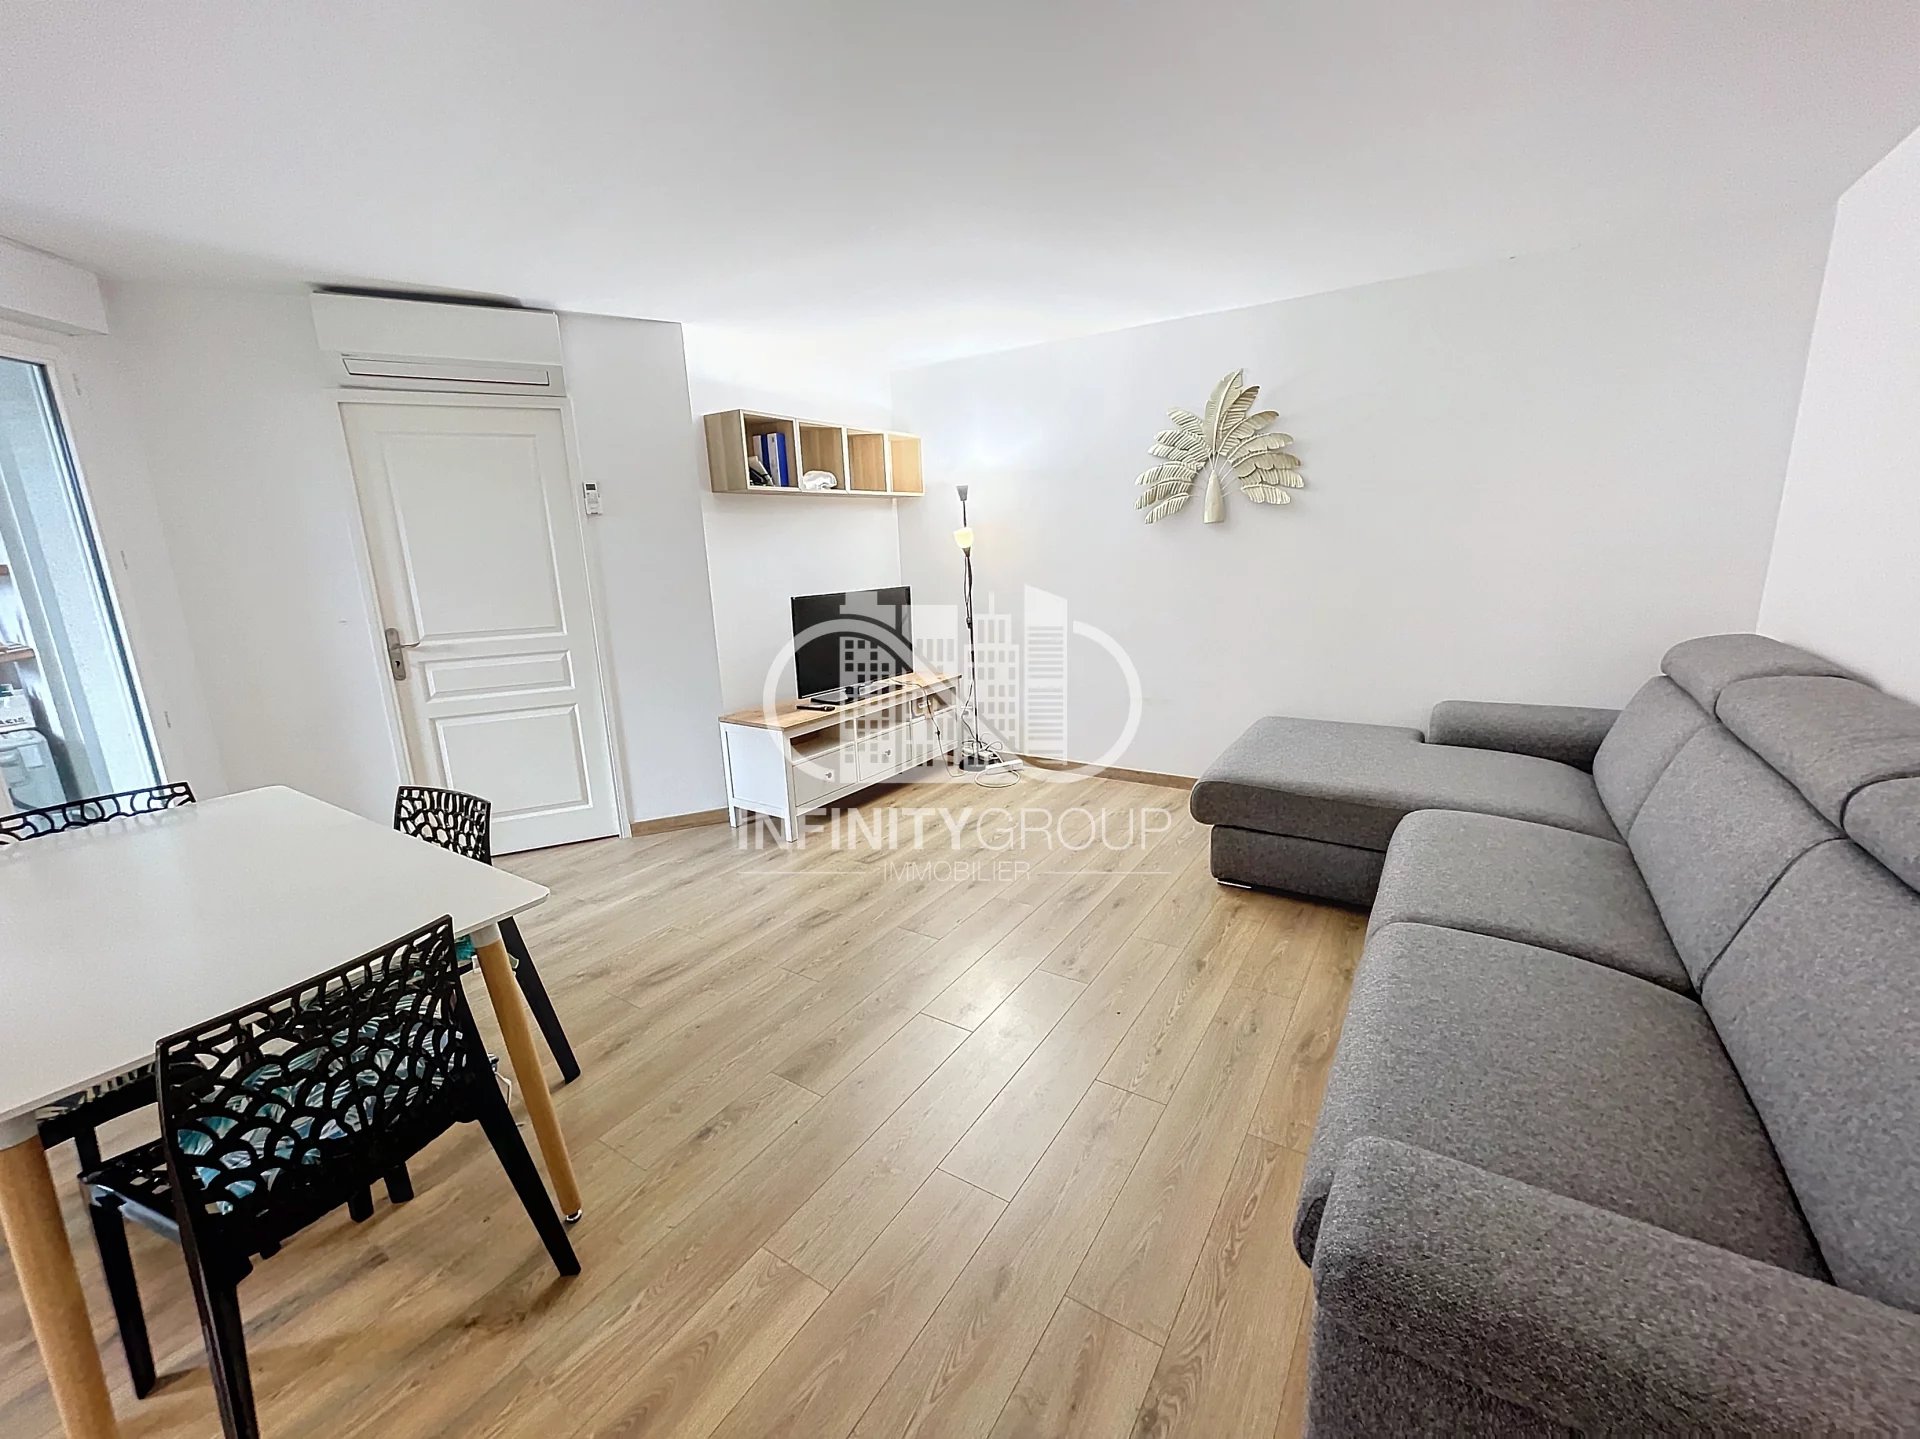 Vente Appartement 56m² 3 Pièces à Antibes (06600) - Infinity Group Immobilier